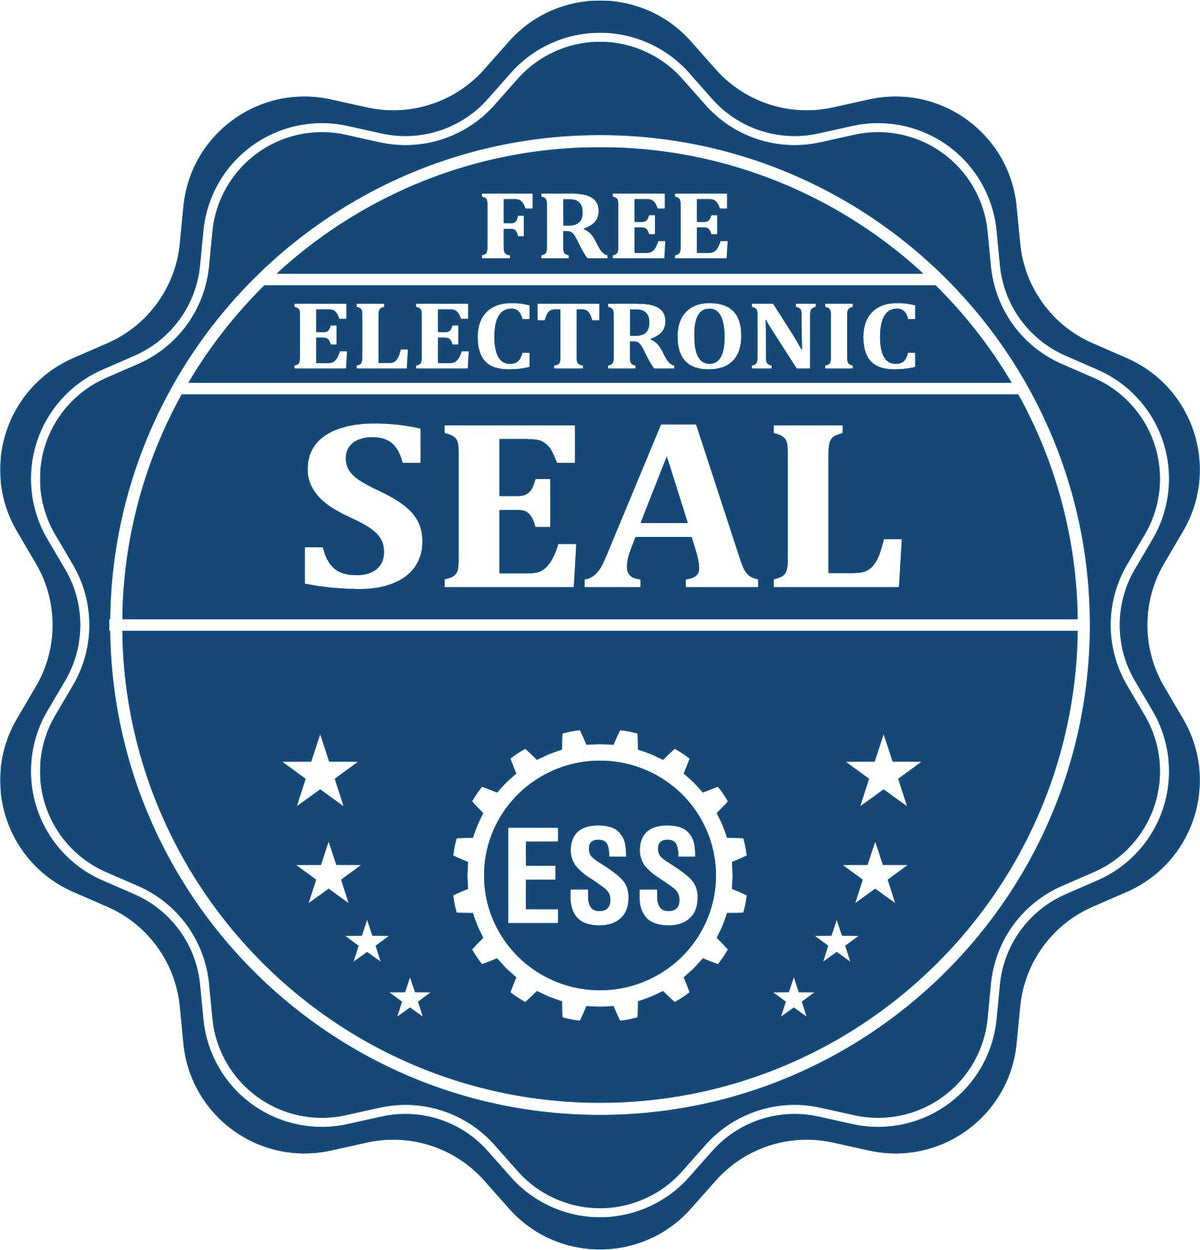 A badge showing a free electronic seal for the Slim Pre-Inked Missouri Architect Seal Stamp with stars and the ESS gear on the emblem.